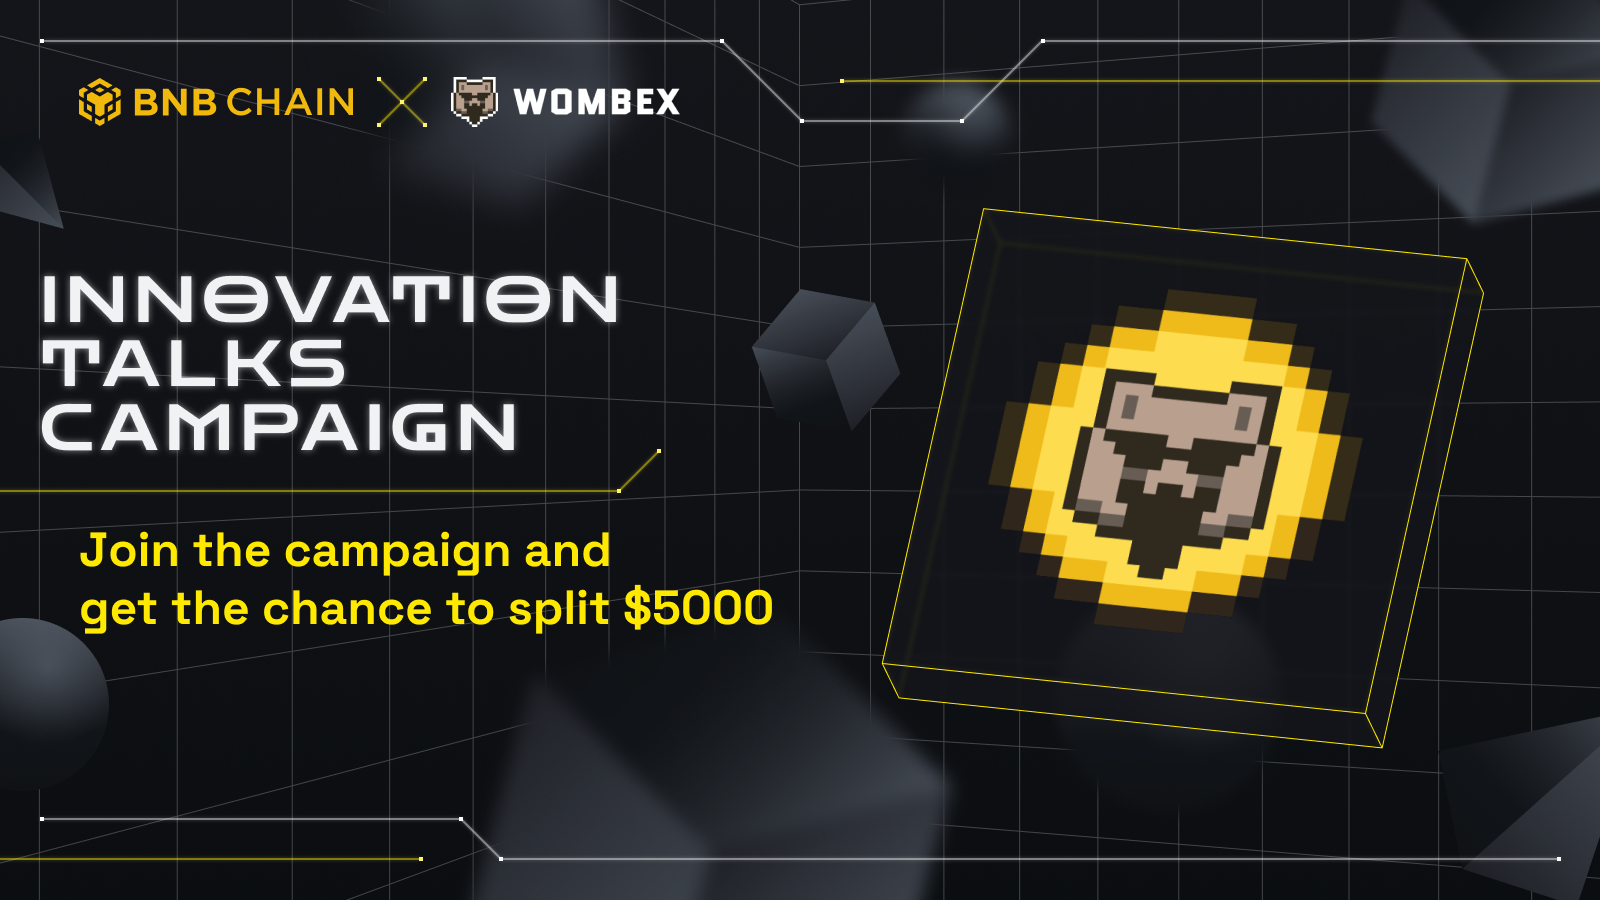 BNB Chain Innovation Talks with Wombex: Wombex Innovation talks campaign